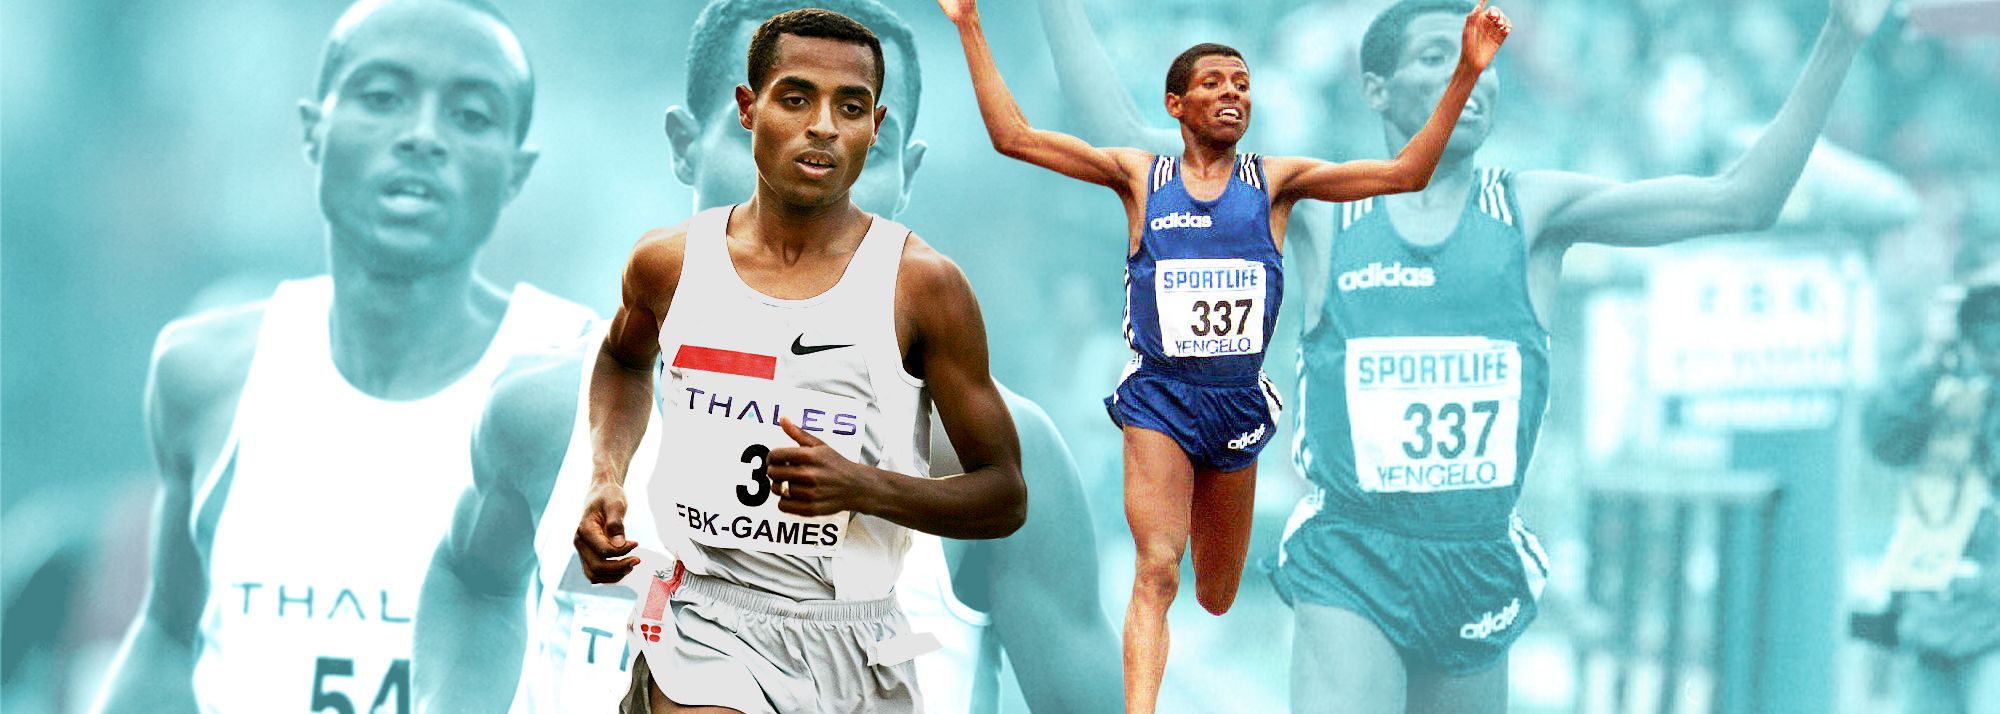 Looking back at the iconic world 5000m records Heile Gebrselassie and Kenenisa Bekele set in the Dutch city